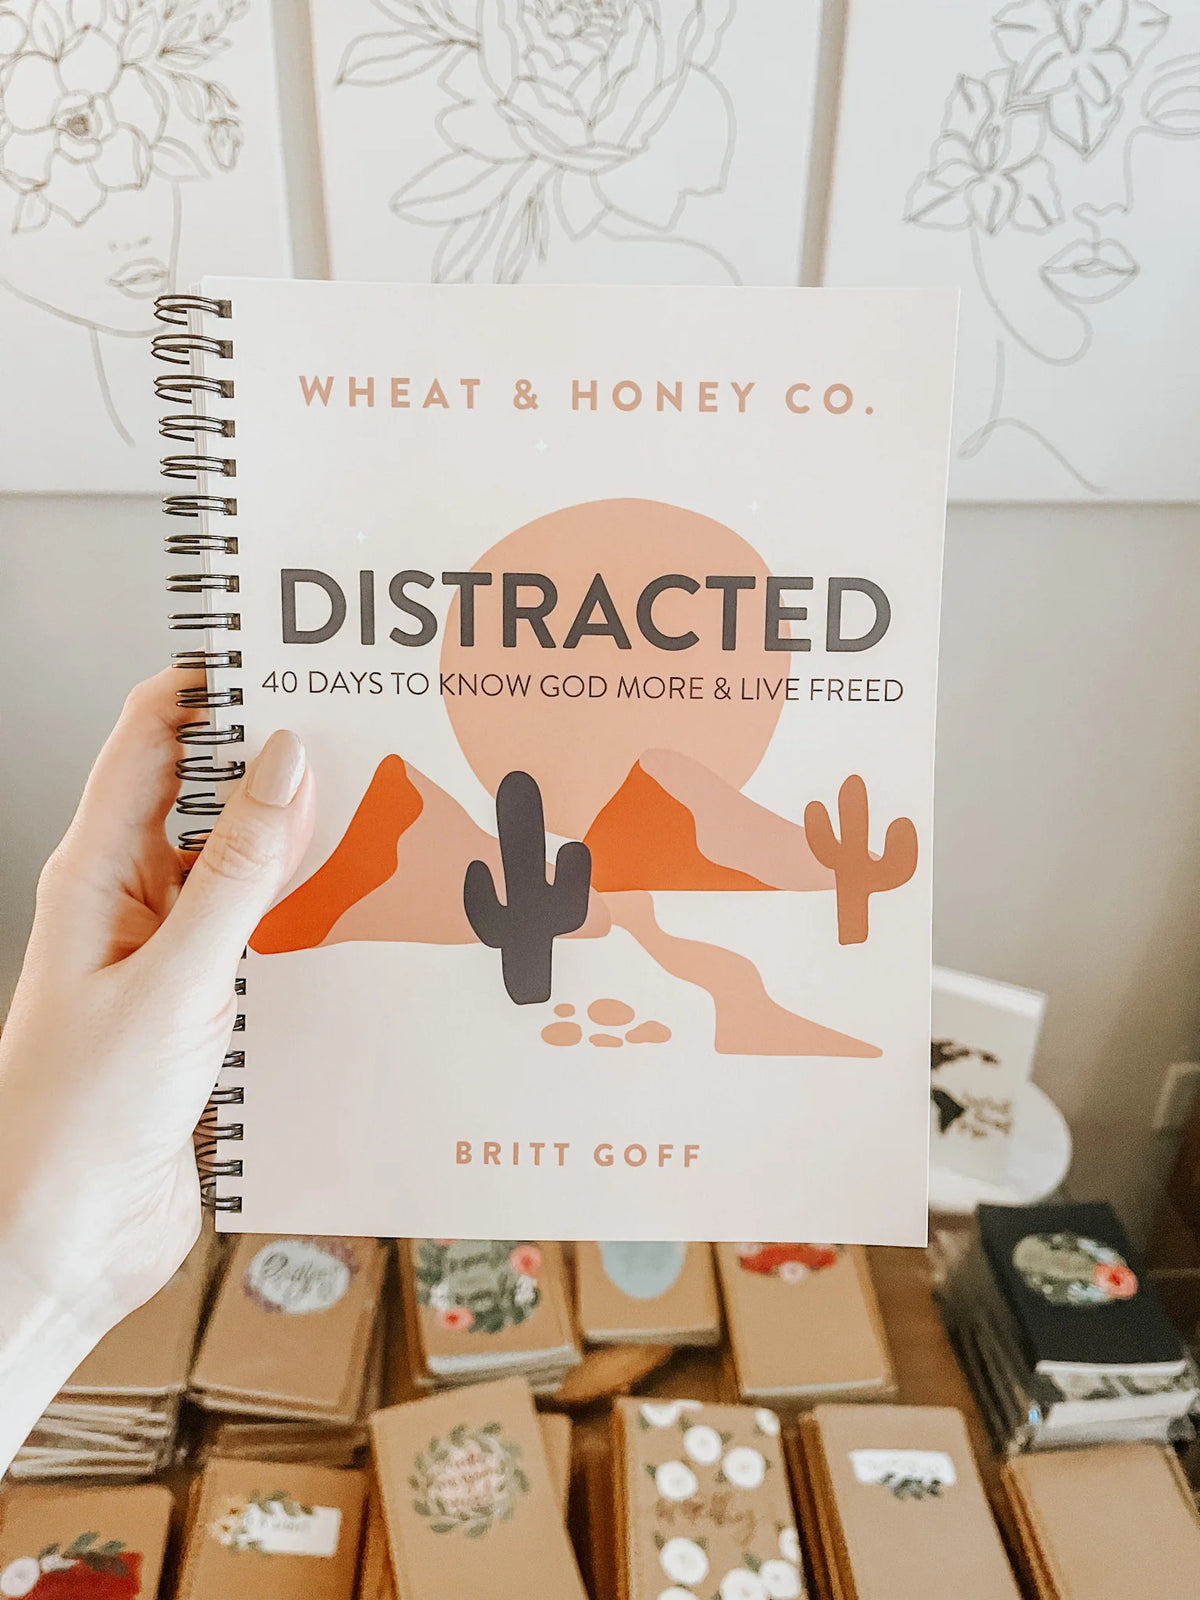 Distracted: 40 Days To know God more-330 Other-Wheat & Honey Co.-Peachy Keen Boutique, Women's Fashion Boutique, Located in Cape Girardeau and Dexter, MO